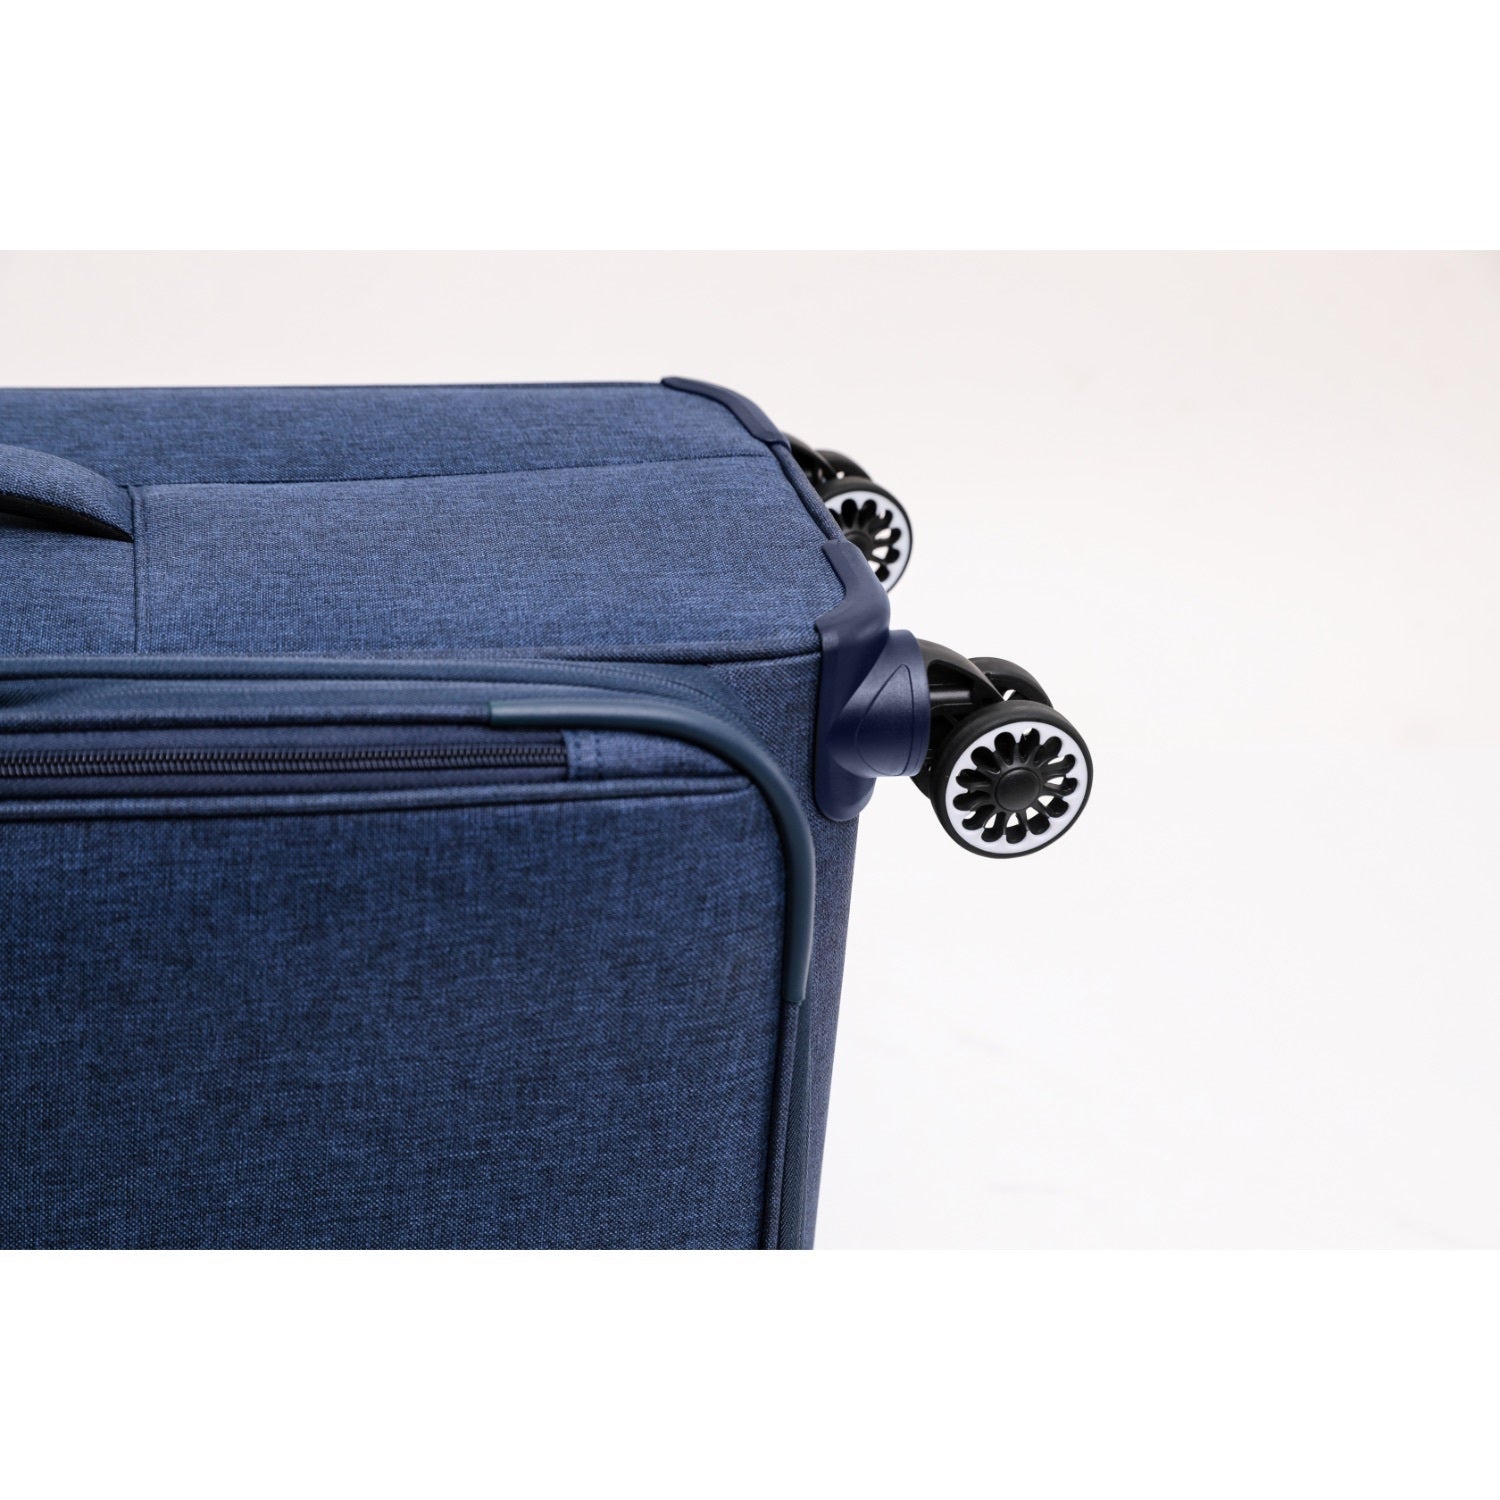 Qantas - QF400 55cm Small Adelaide Soft sided spinner - Navy-8